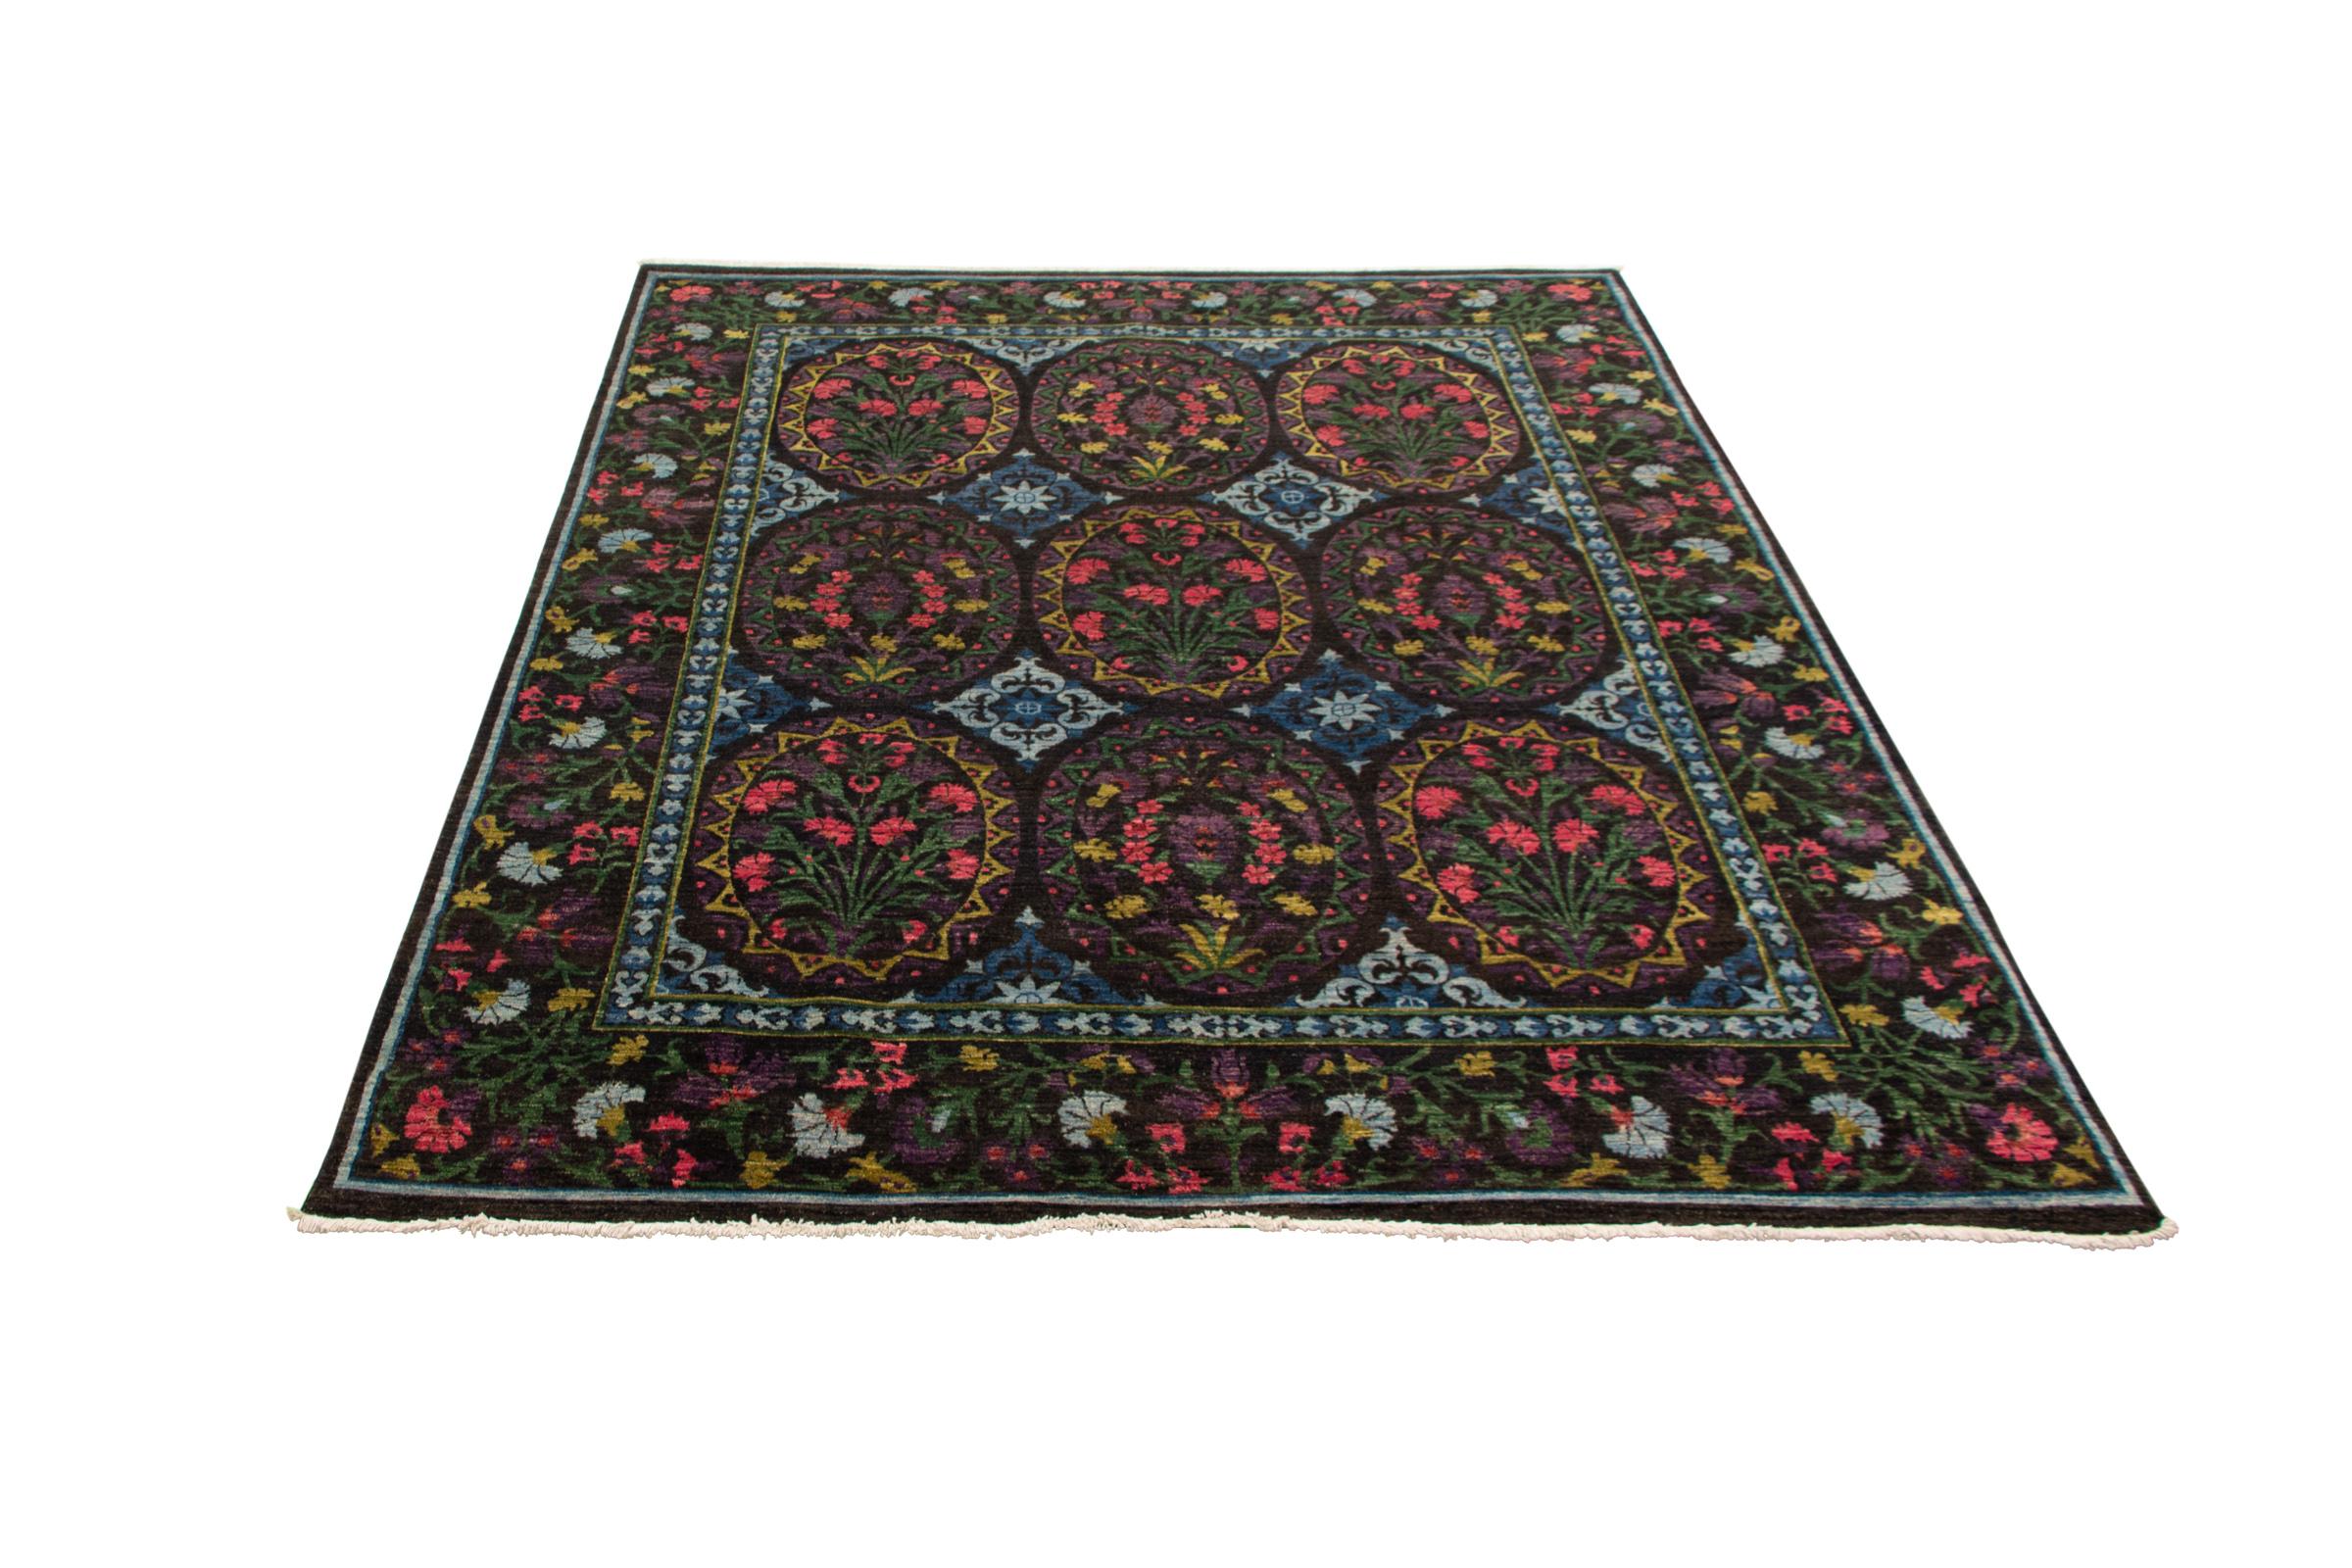 Oushak Transitional Hand-knotted Wool Lahore Carpet with Floral Design, 8' x 10' For Sale